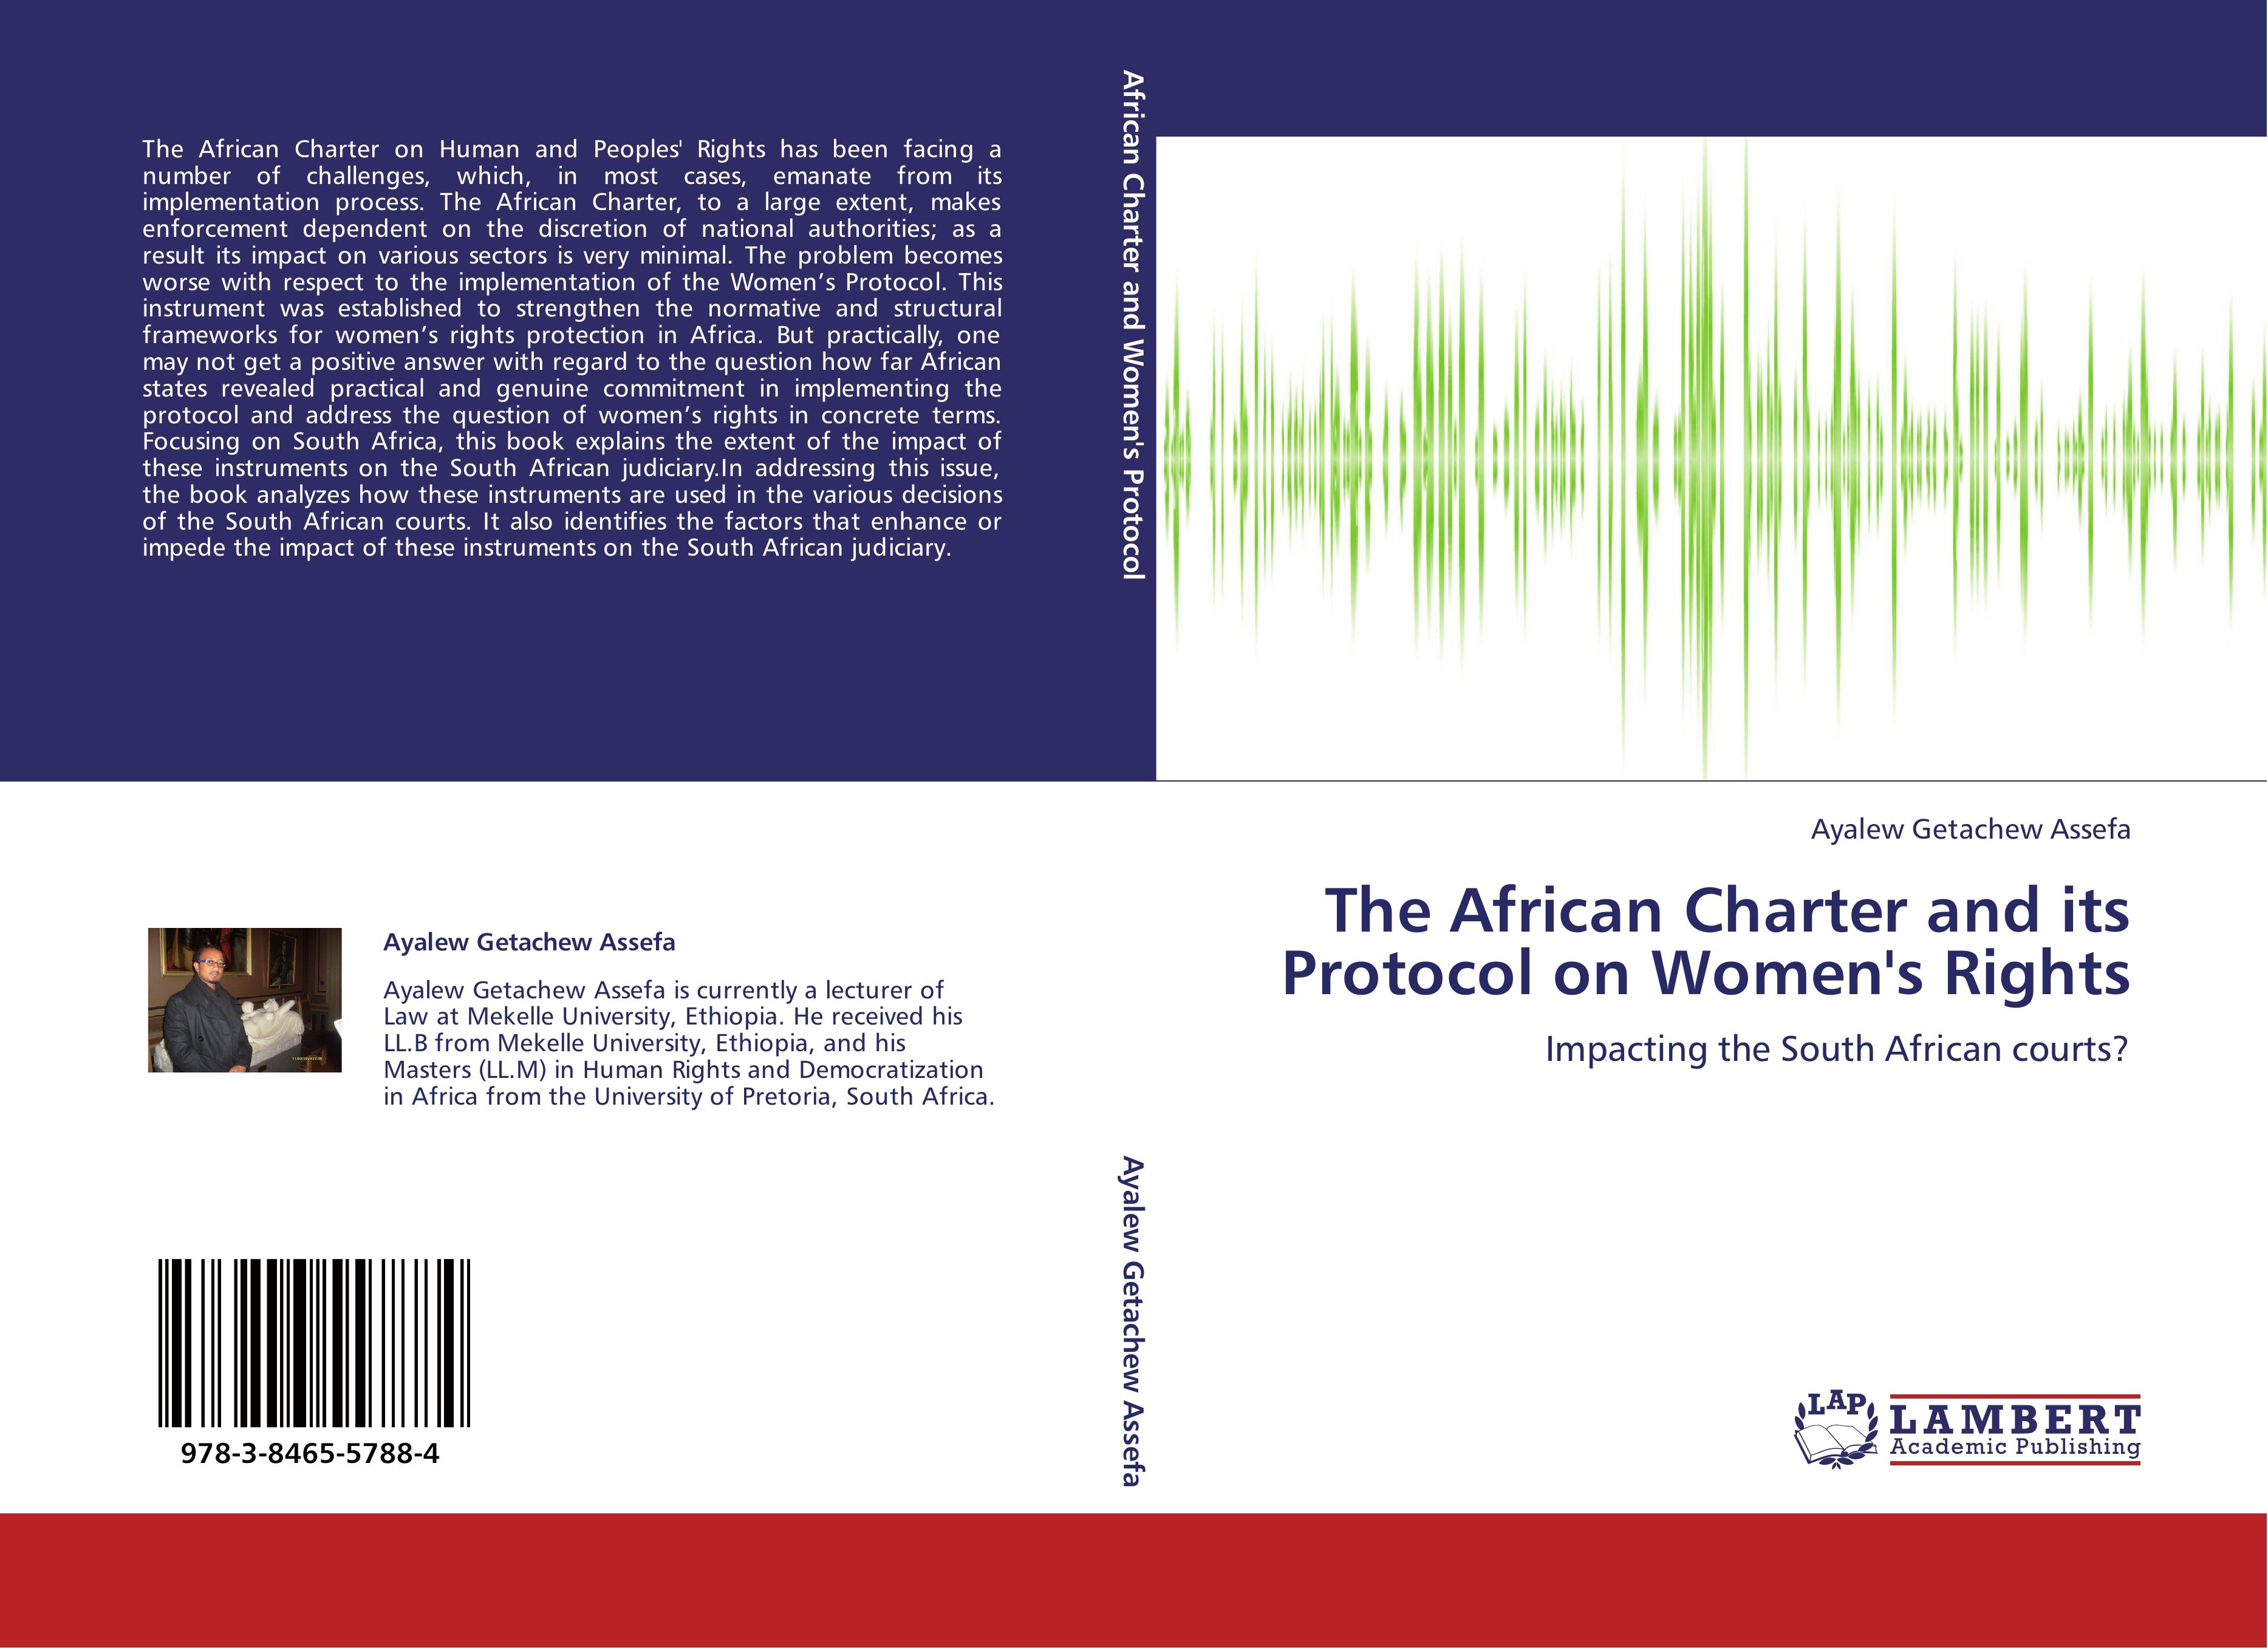 The African Charter and its Protocol on Women's Rights - Ayalew Getachew Assefa